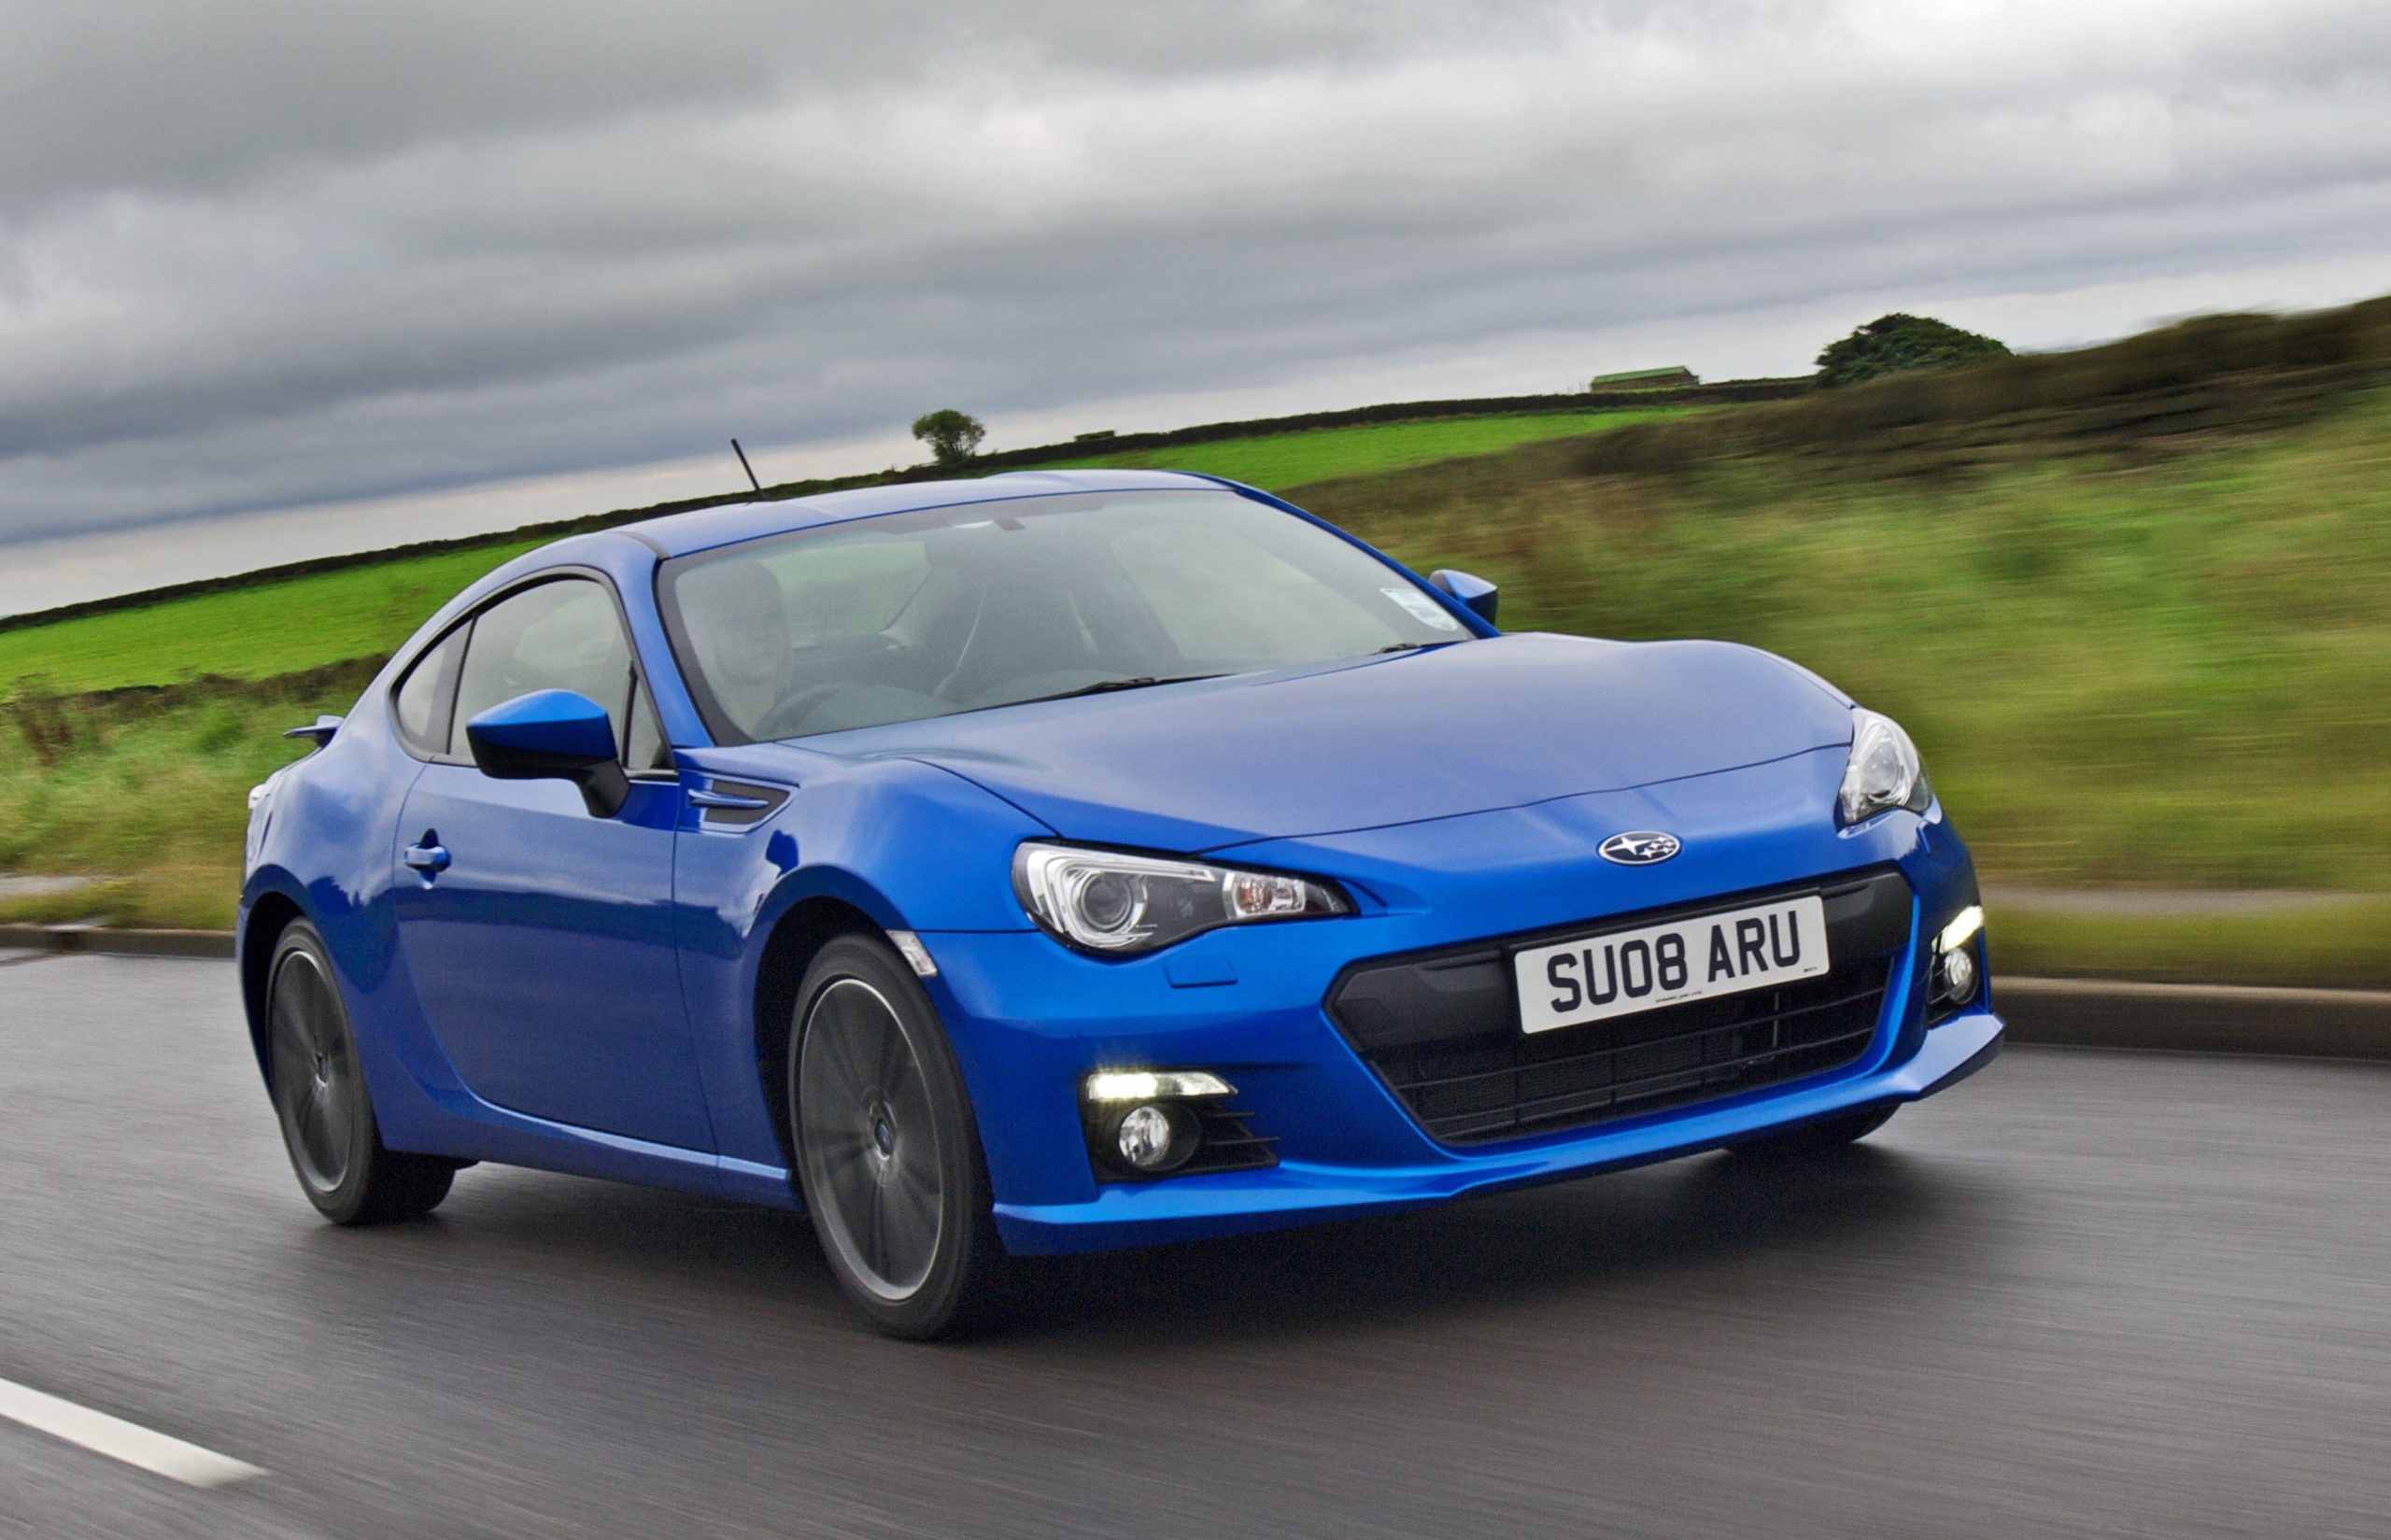 New Subaru BRZ sports car unlikely to come to the UK as boss insists